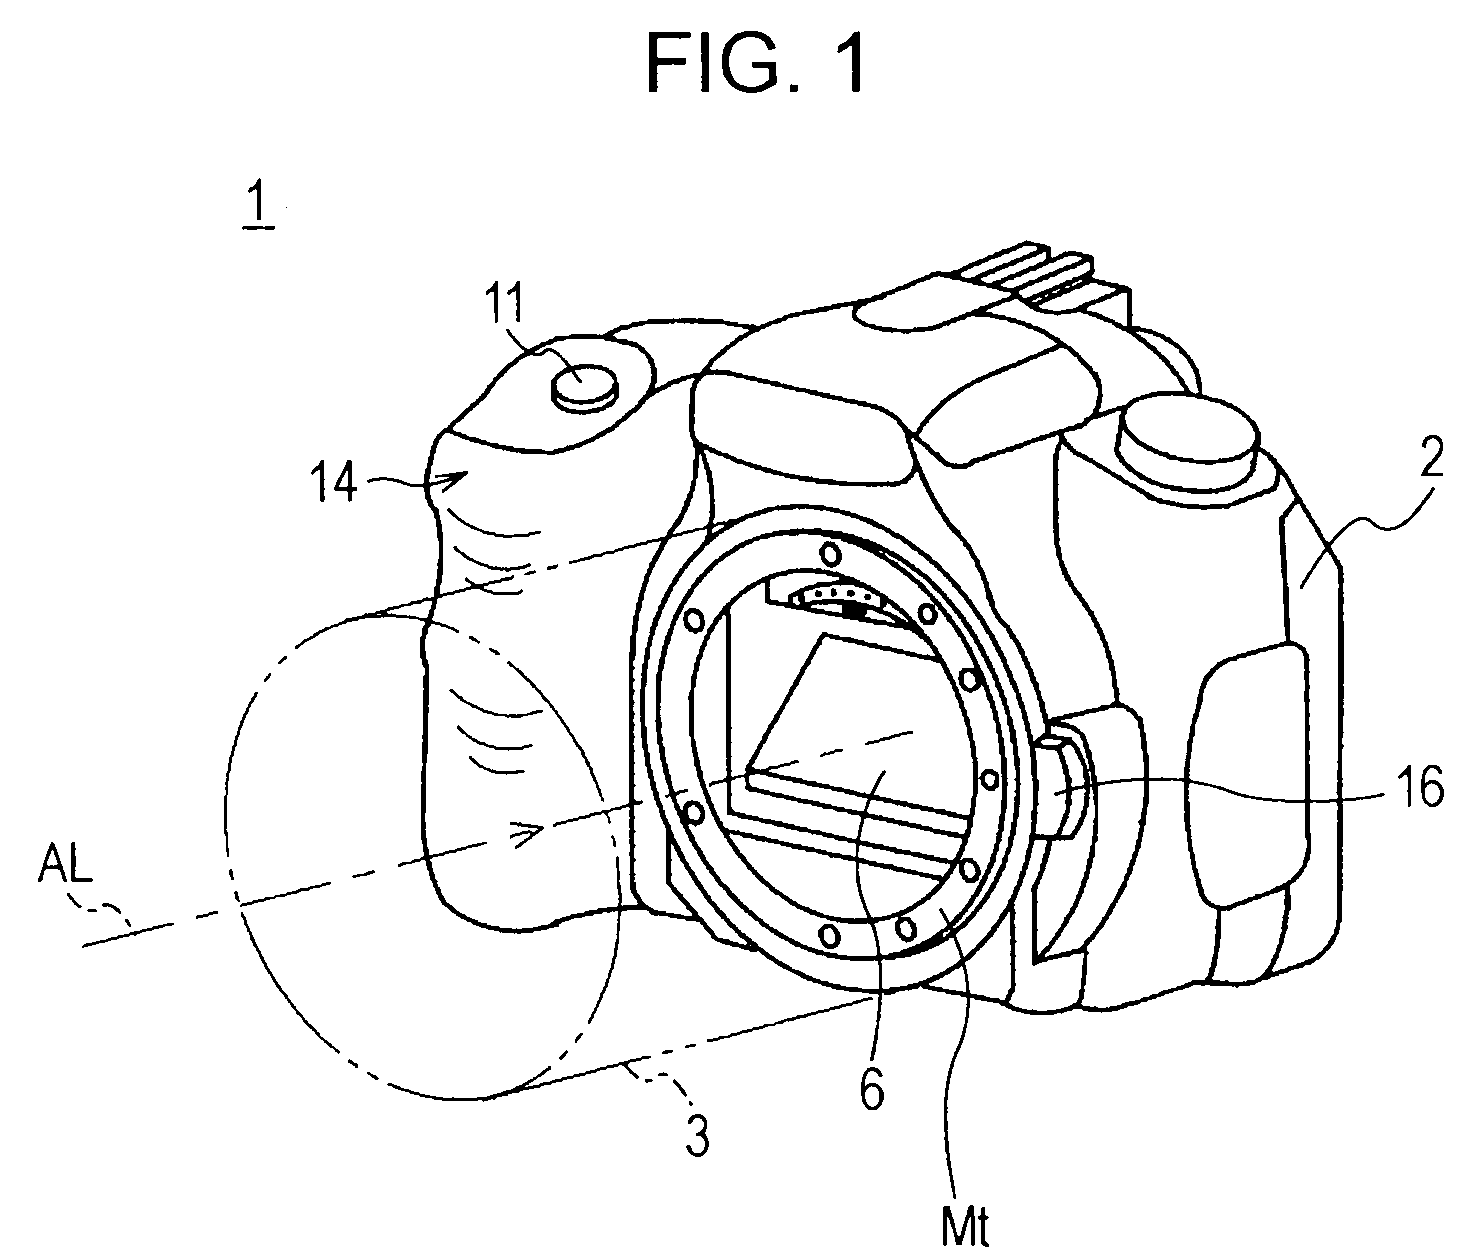 Image pickup apparatus with movable half mirror for auto focusing